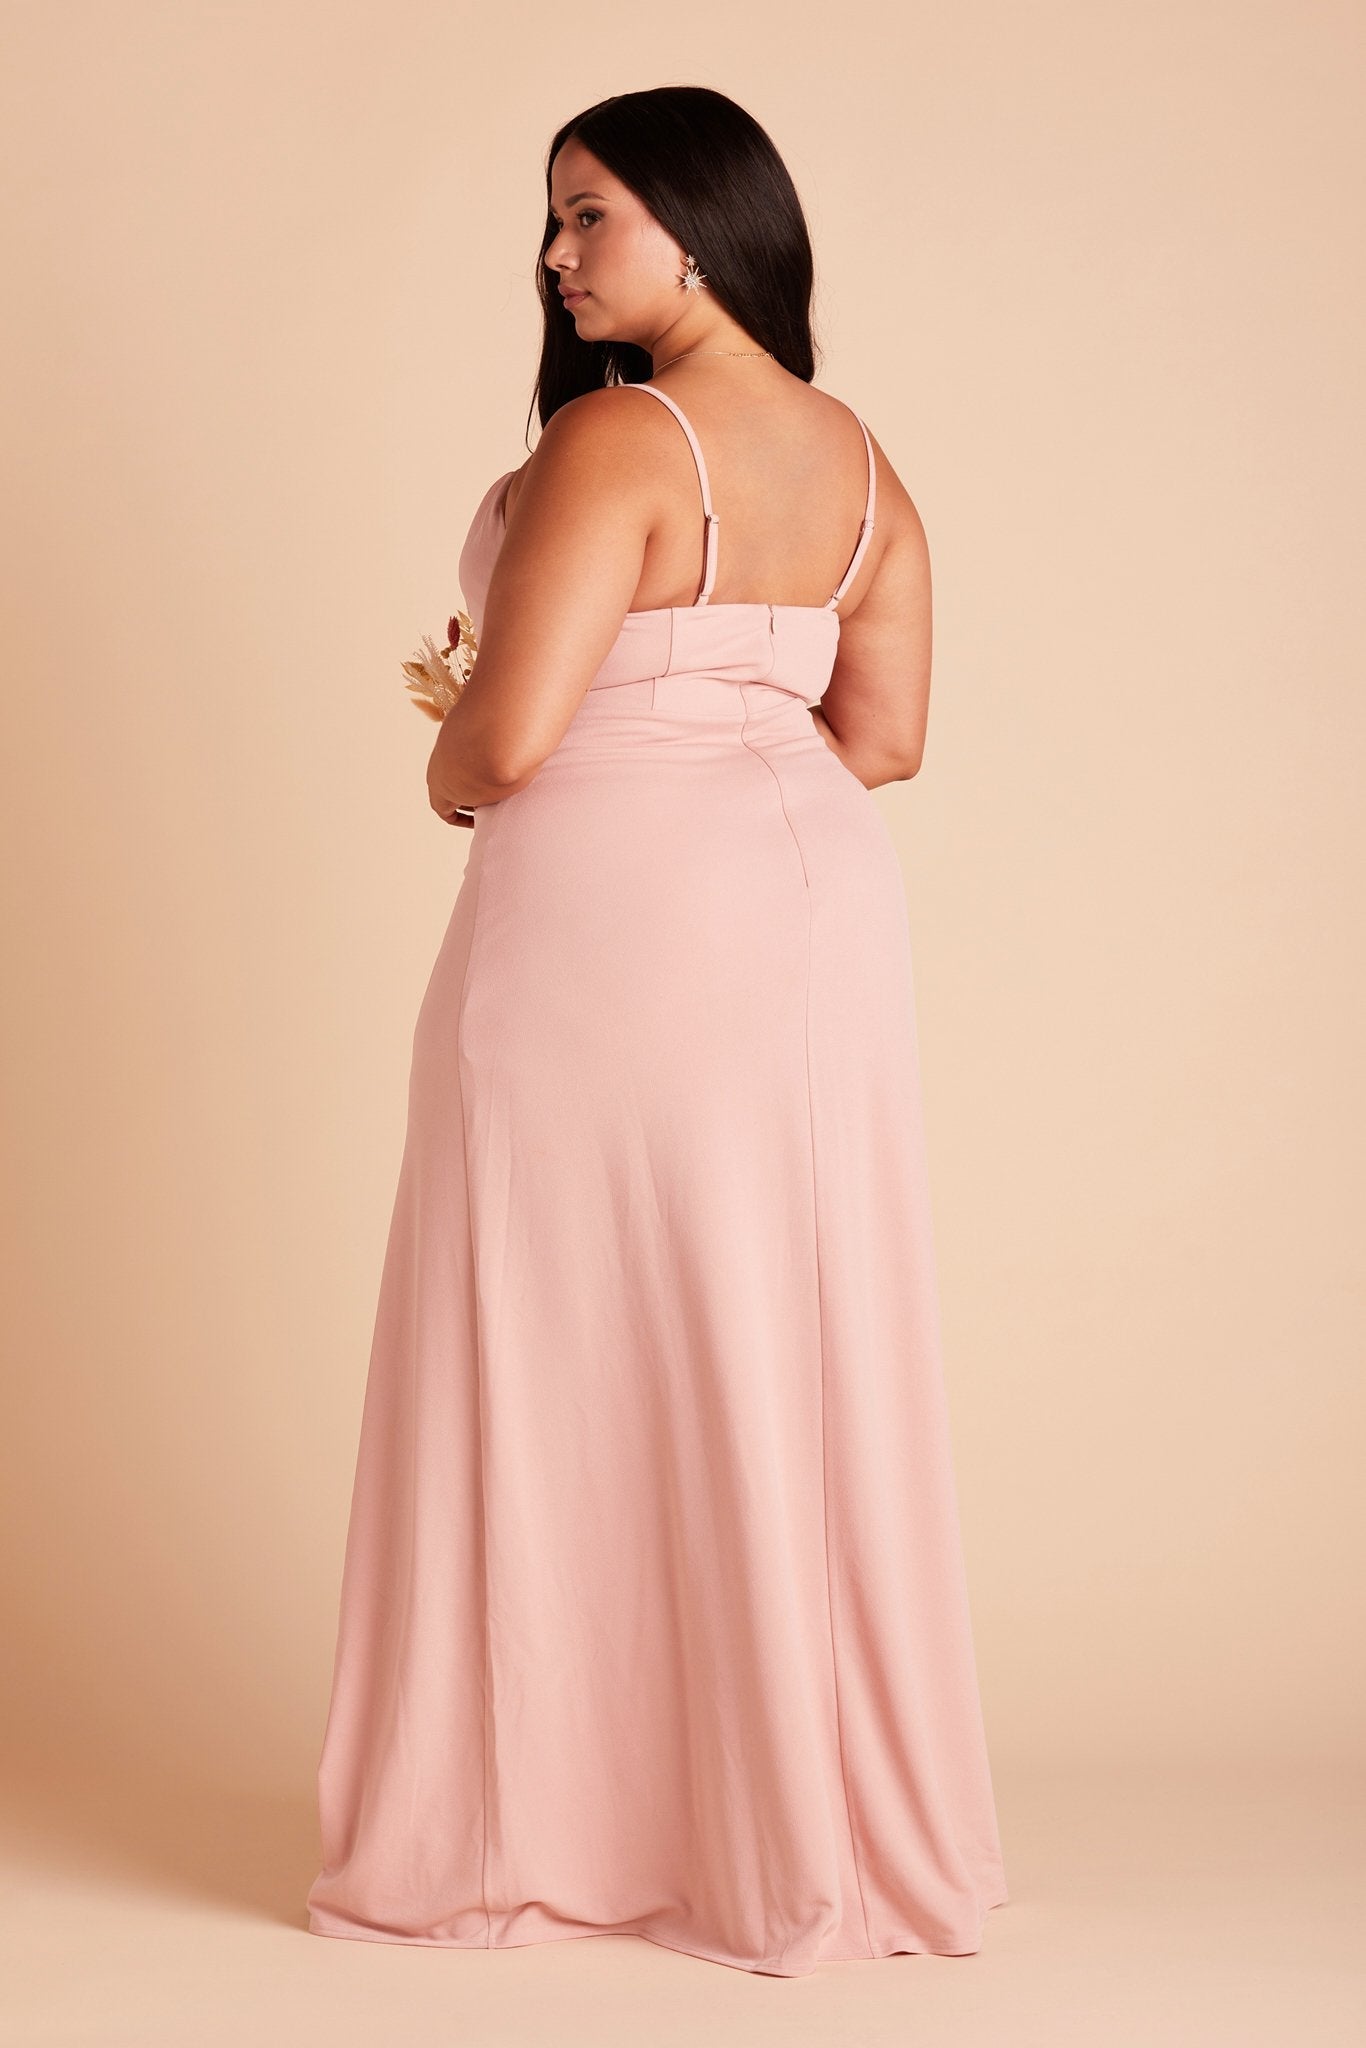 Back view of the Ash Plus Size Bridesmaid Dress in dusty rose crepe shows skinny adjustable straps as well as an open back just below shoulder blades.